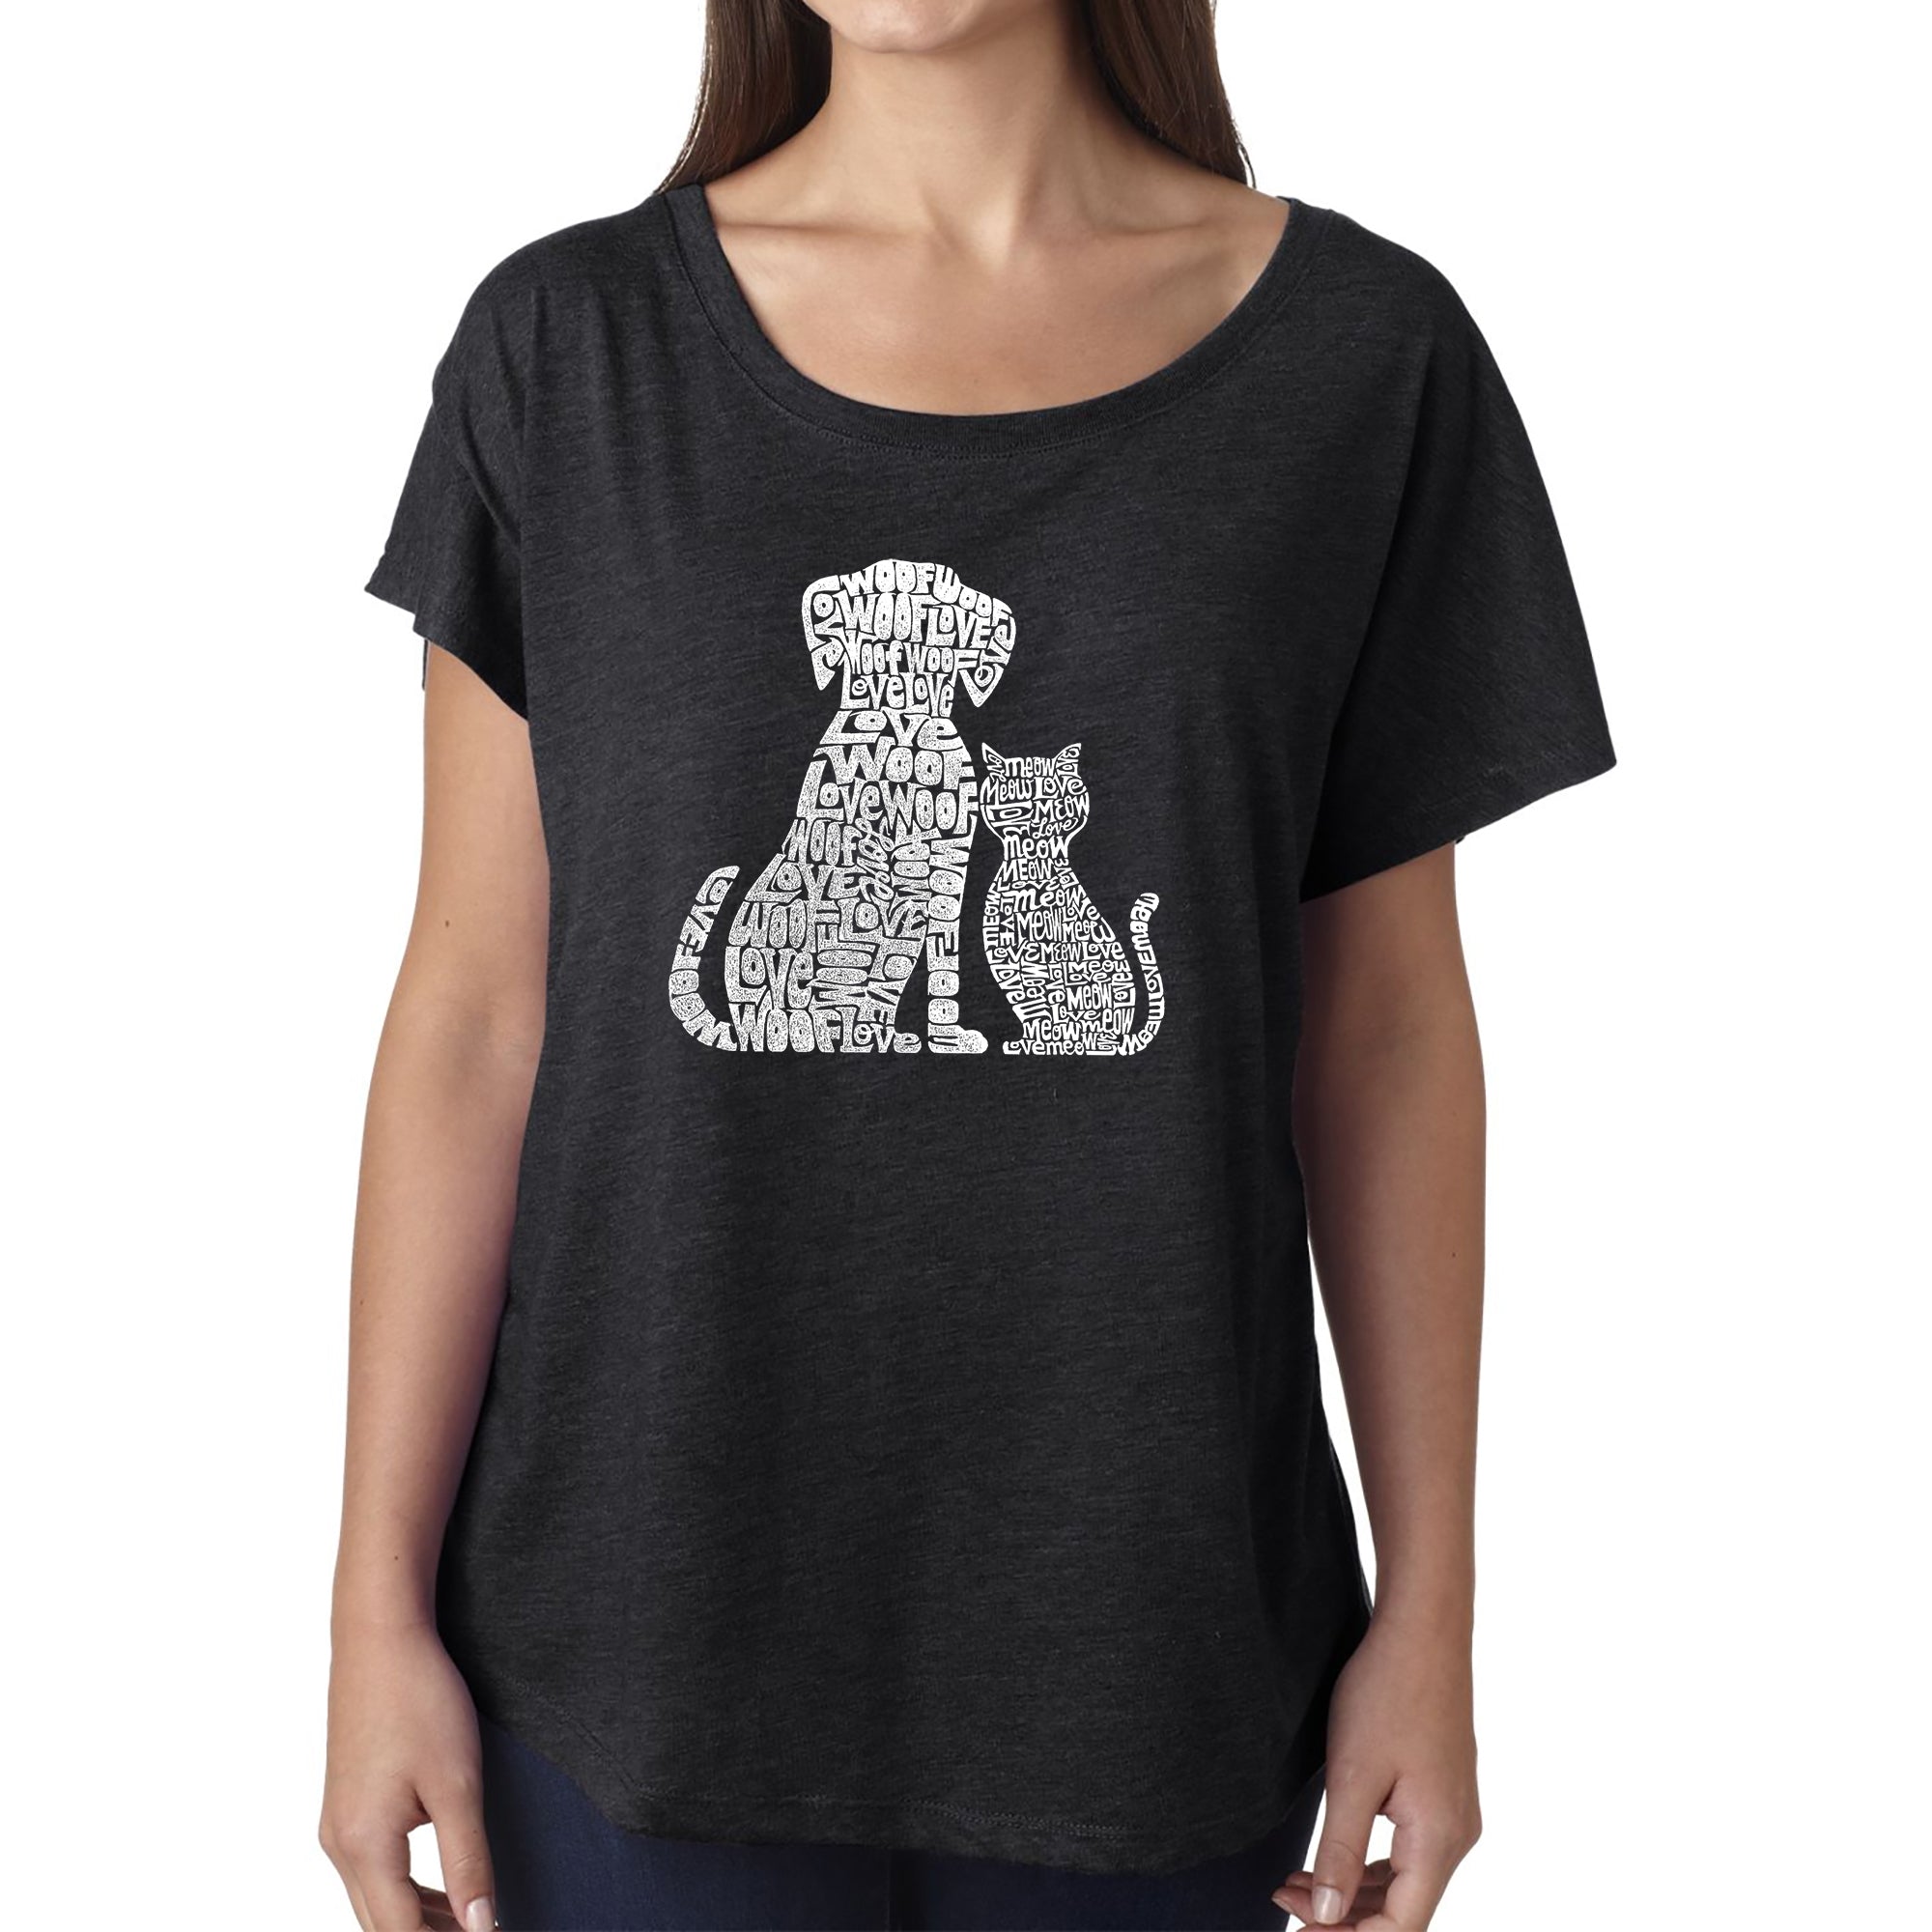 Dogs And Cats - Women's Loose Fit Dolman Cut Word Art Shirt - Navy - Small